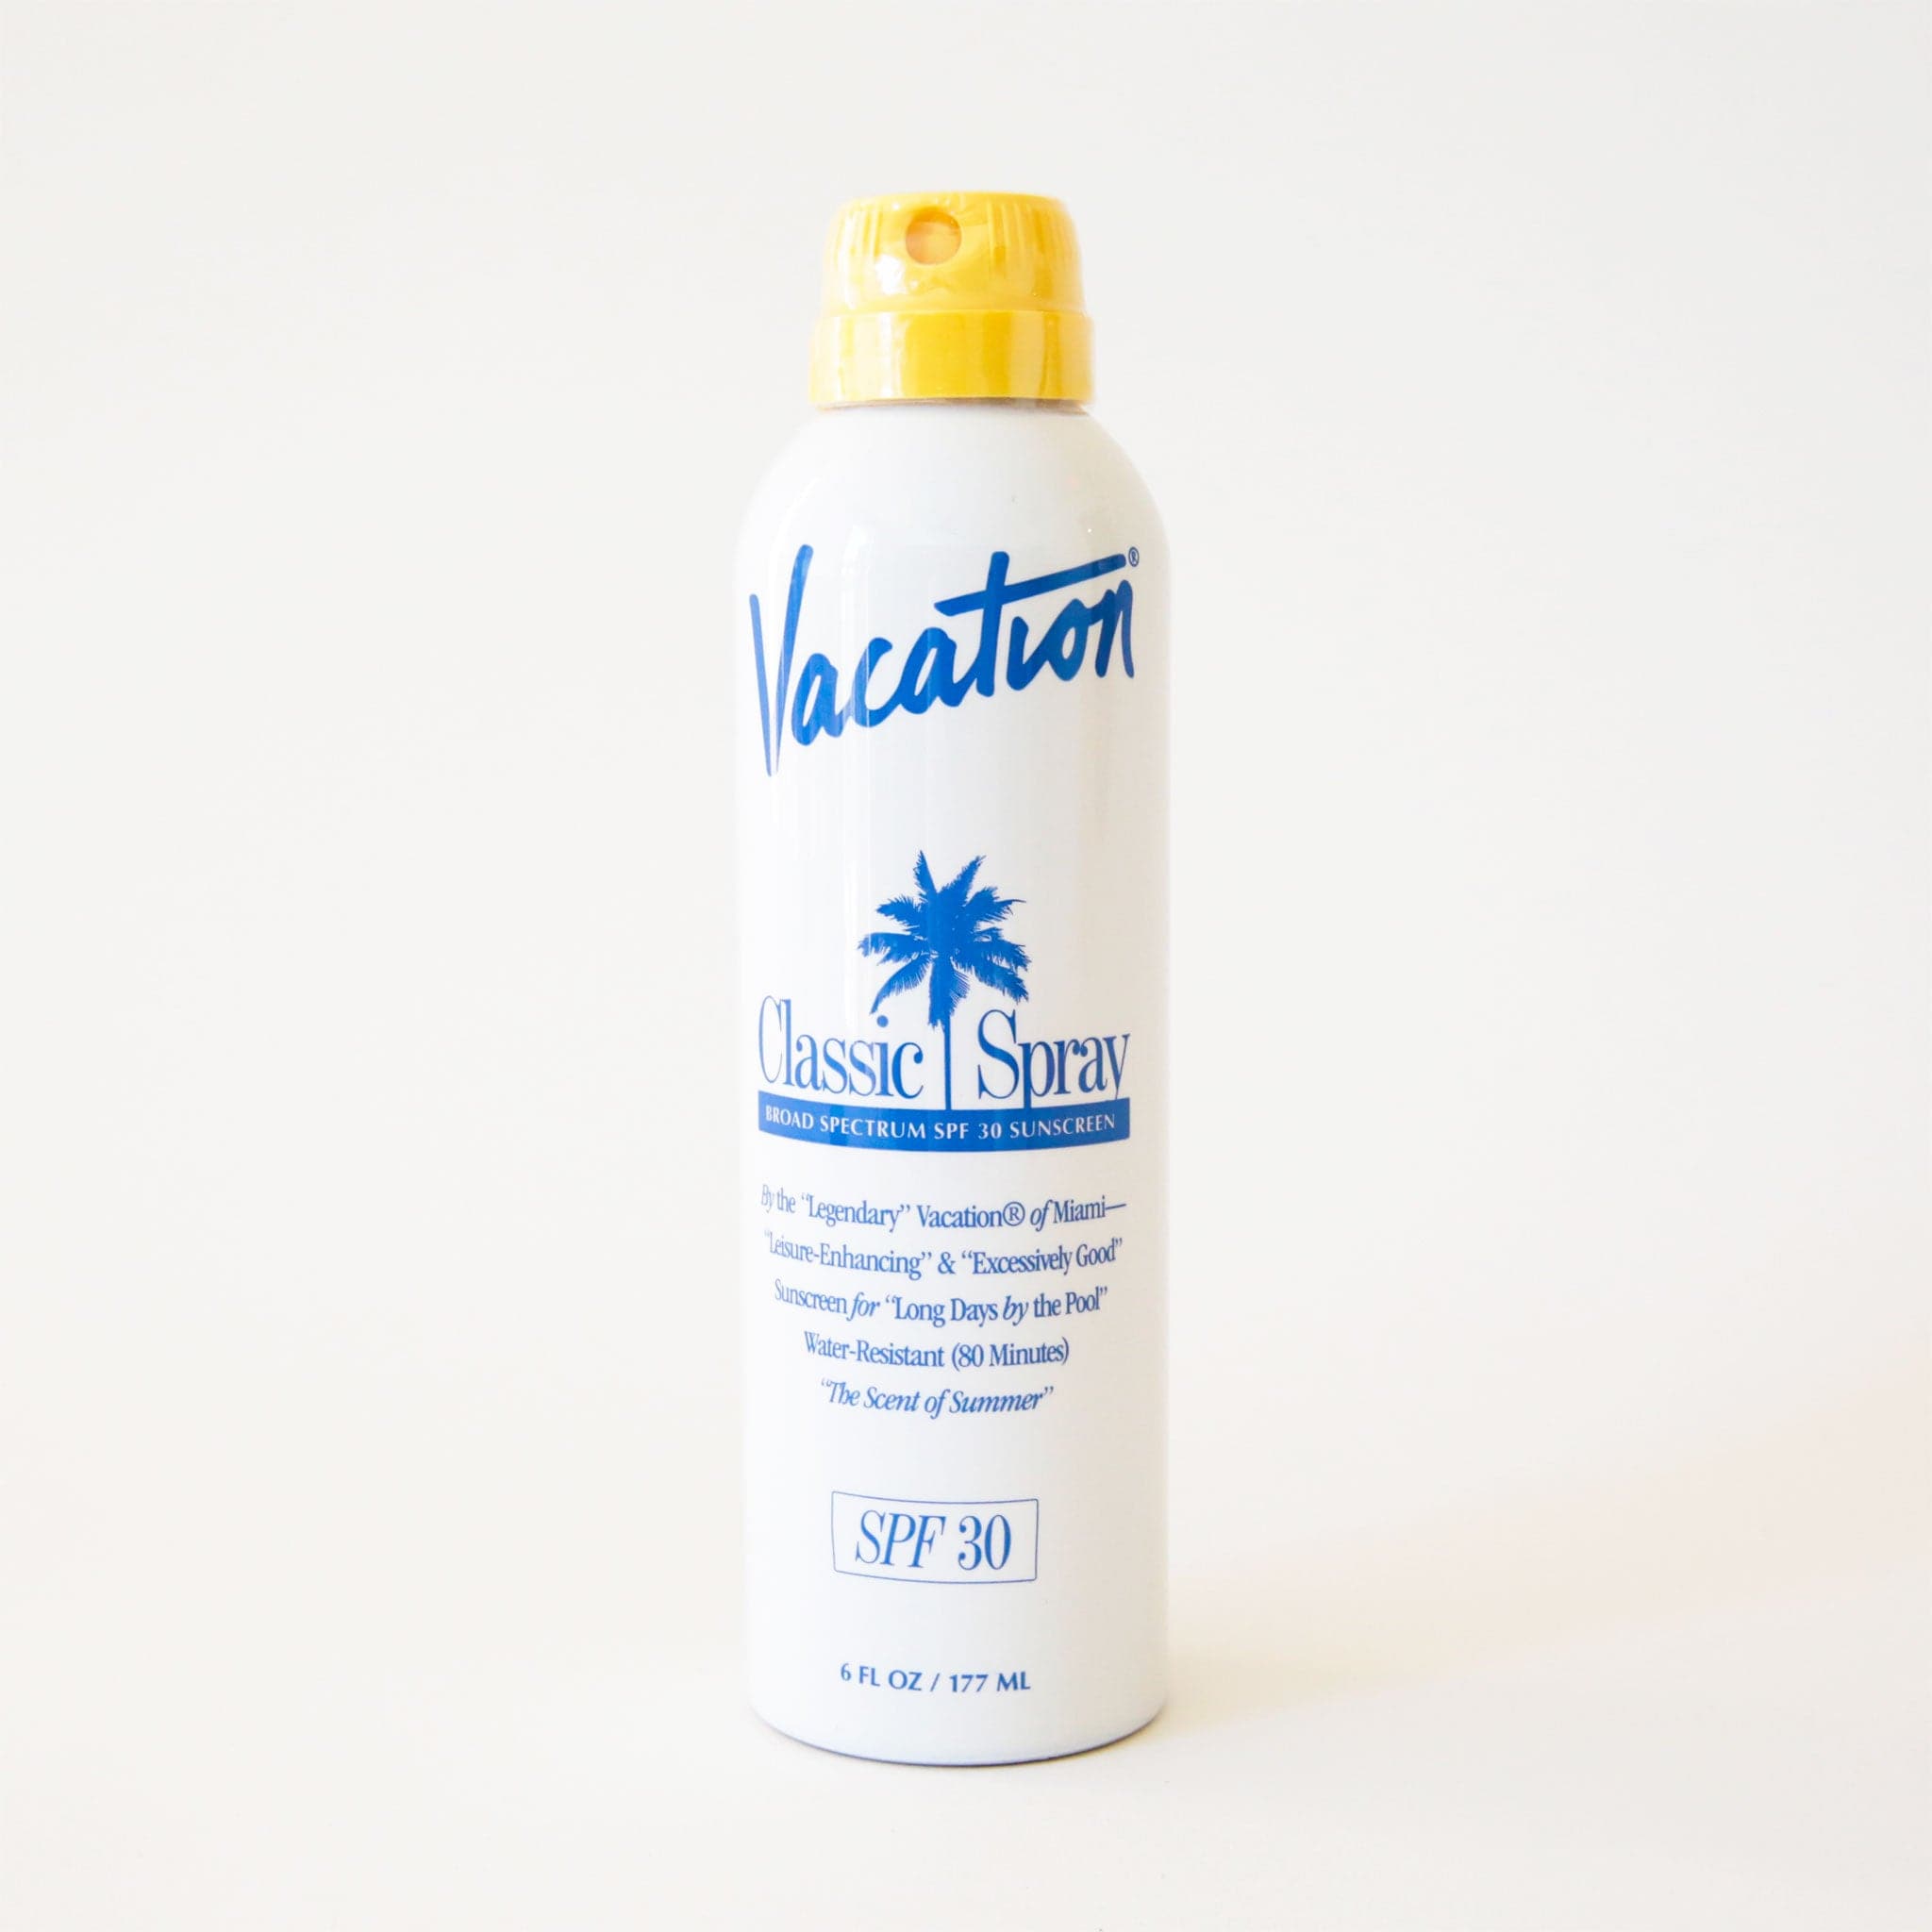 White glossy bottle of spray sunscreen. The bottle reads 'Vacation, Classic Spray, Broad Spectrum SPF 30 Sunscreen' in blue lettering. The bottle is complete with a yellow spray cap. 